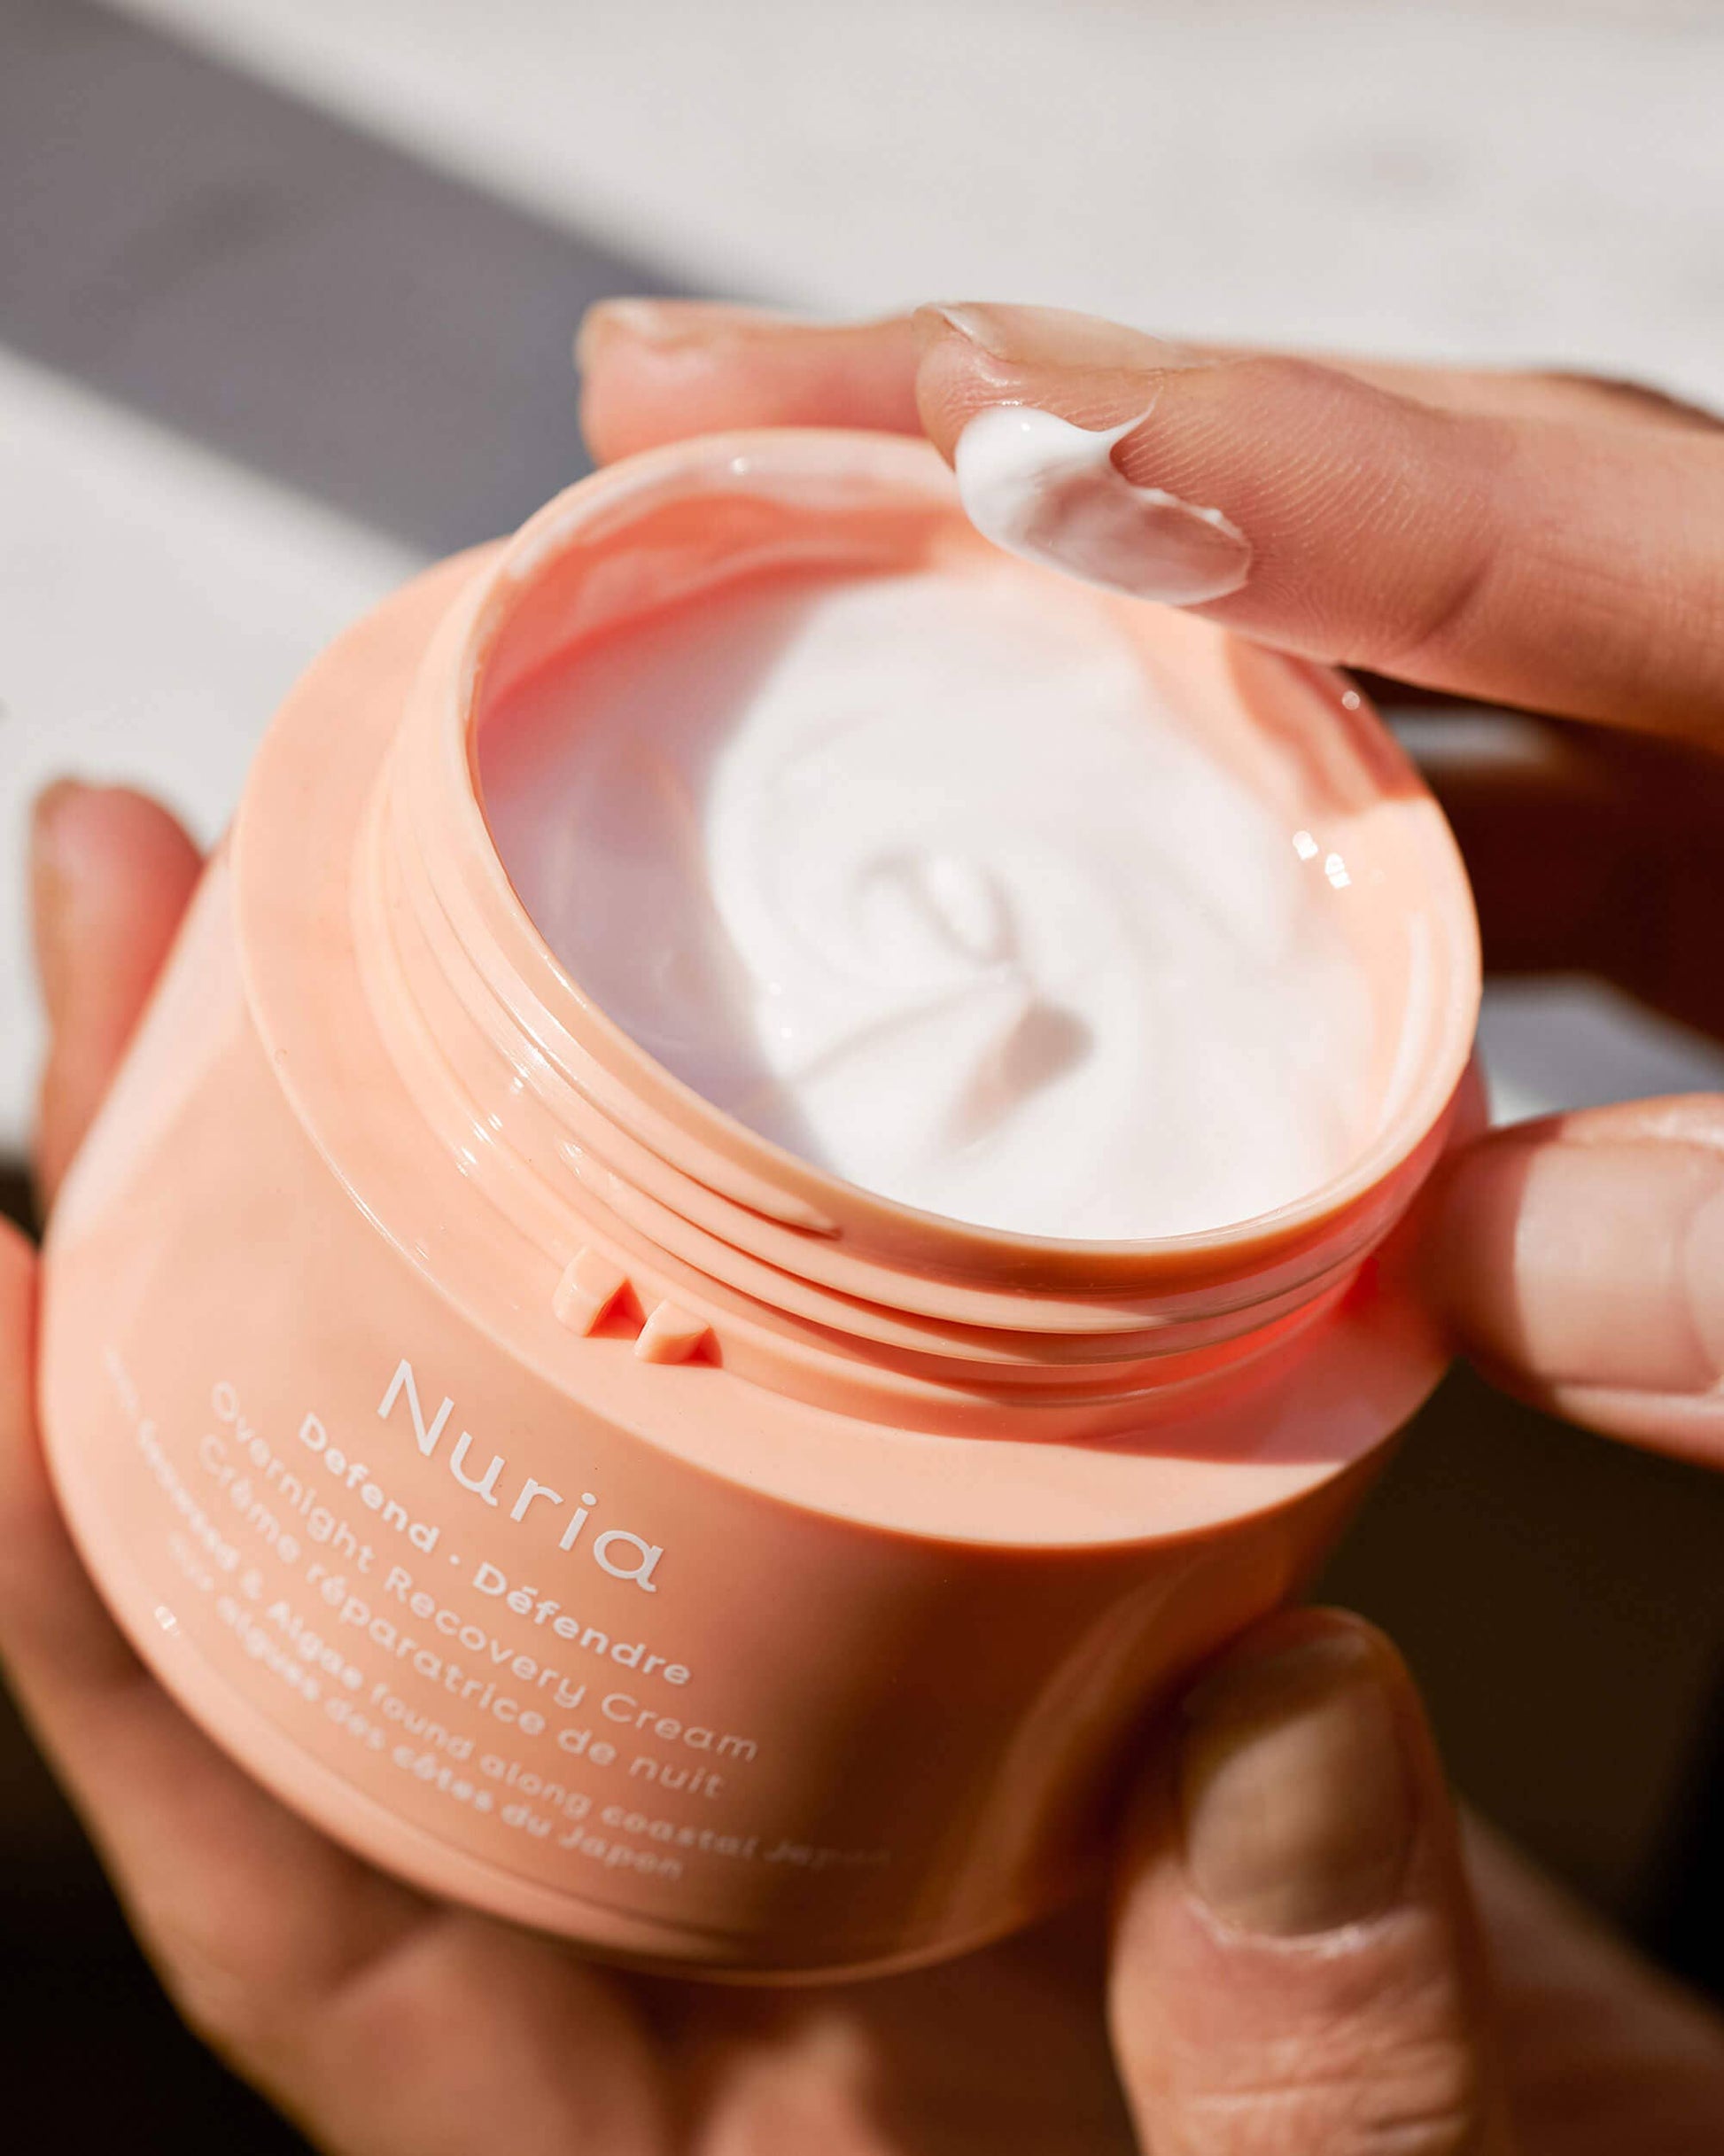 Jar of Nuria Defend Overnight Recovery Cream with a woman's hand dipped into it to show texture of the facial cream. Sold at Juniper Skincare in Edina, Minnesota.